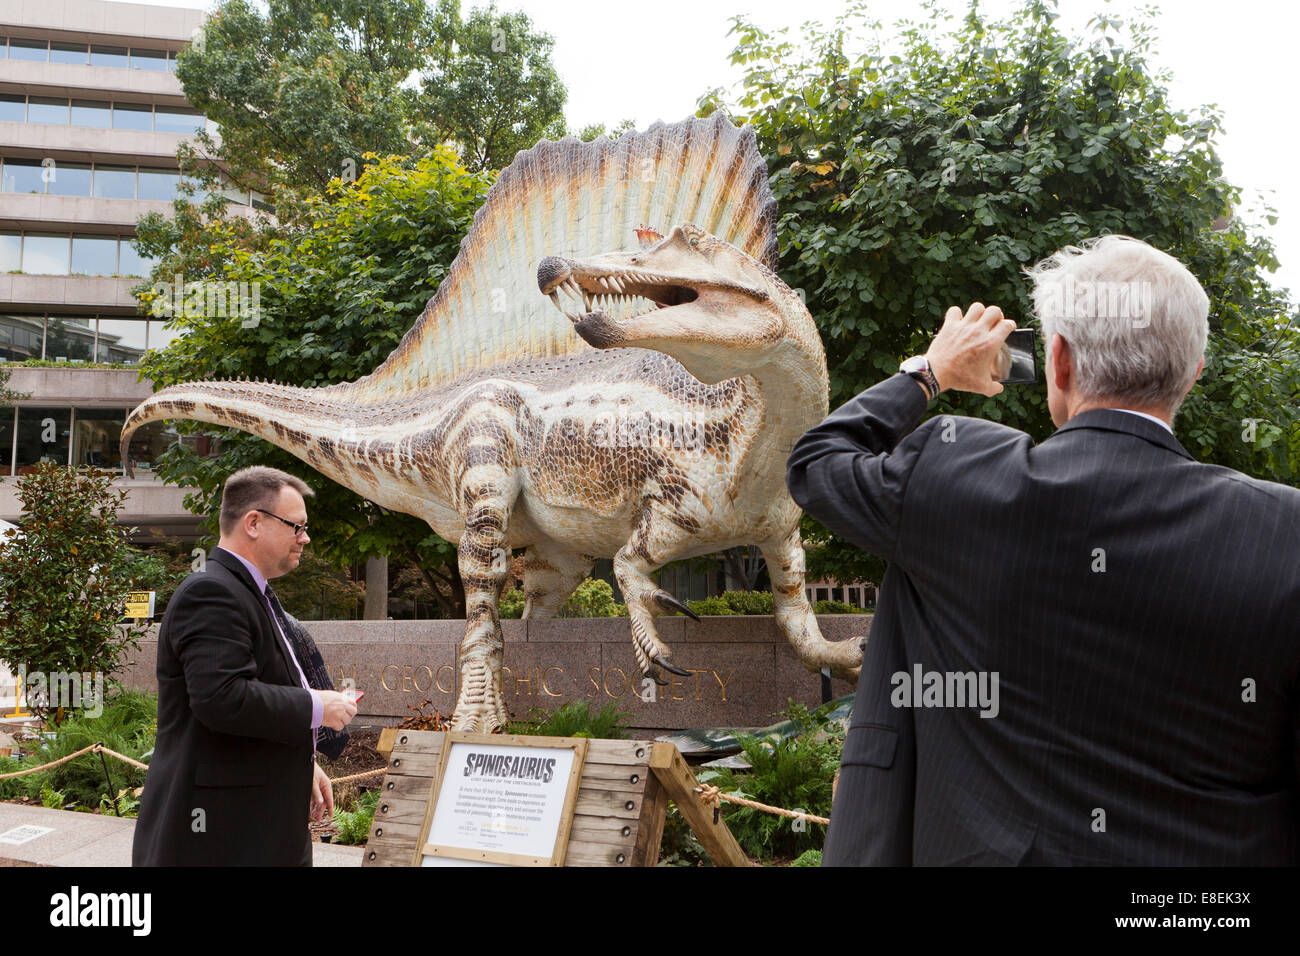 Spinosaurus sculpture in front of the National Geographic Society HQ - Washington, DC USA Stock Photo